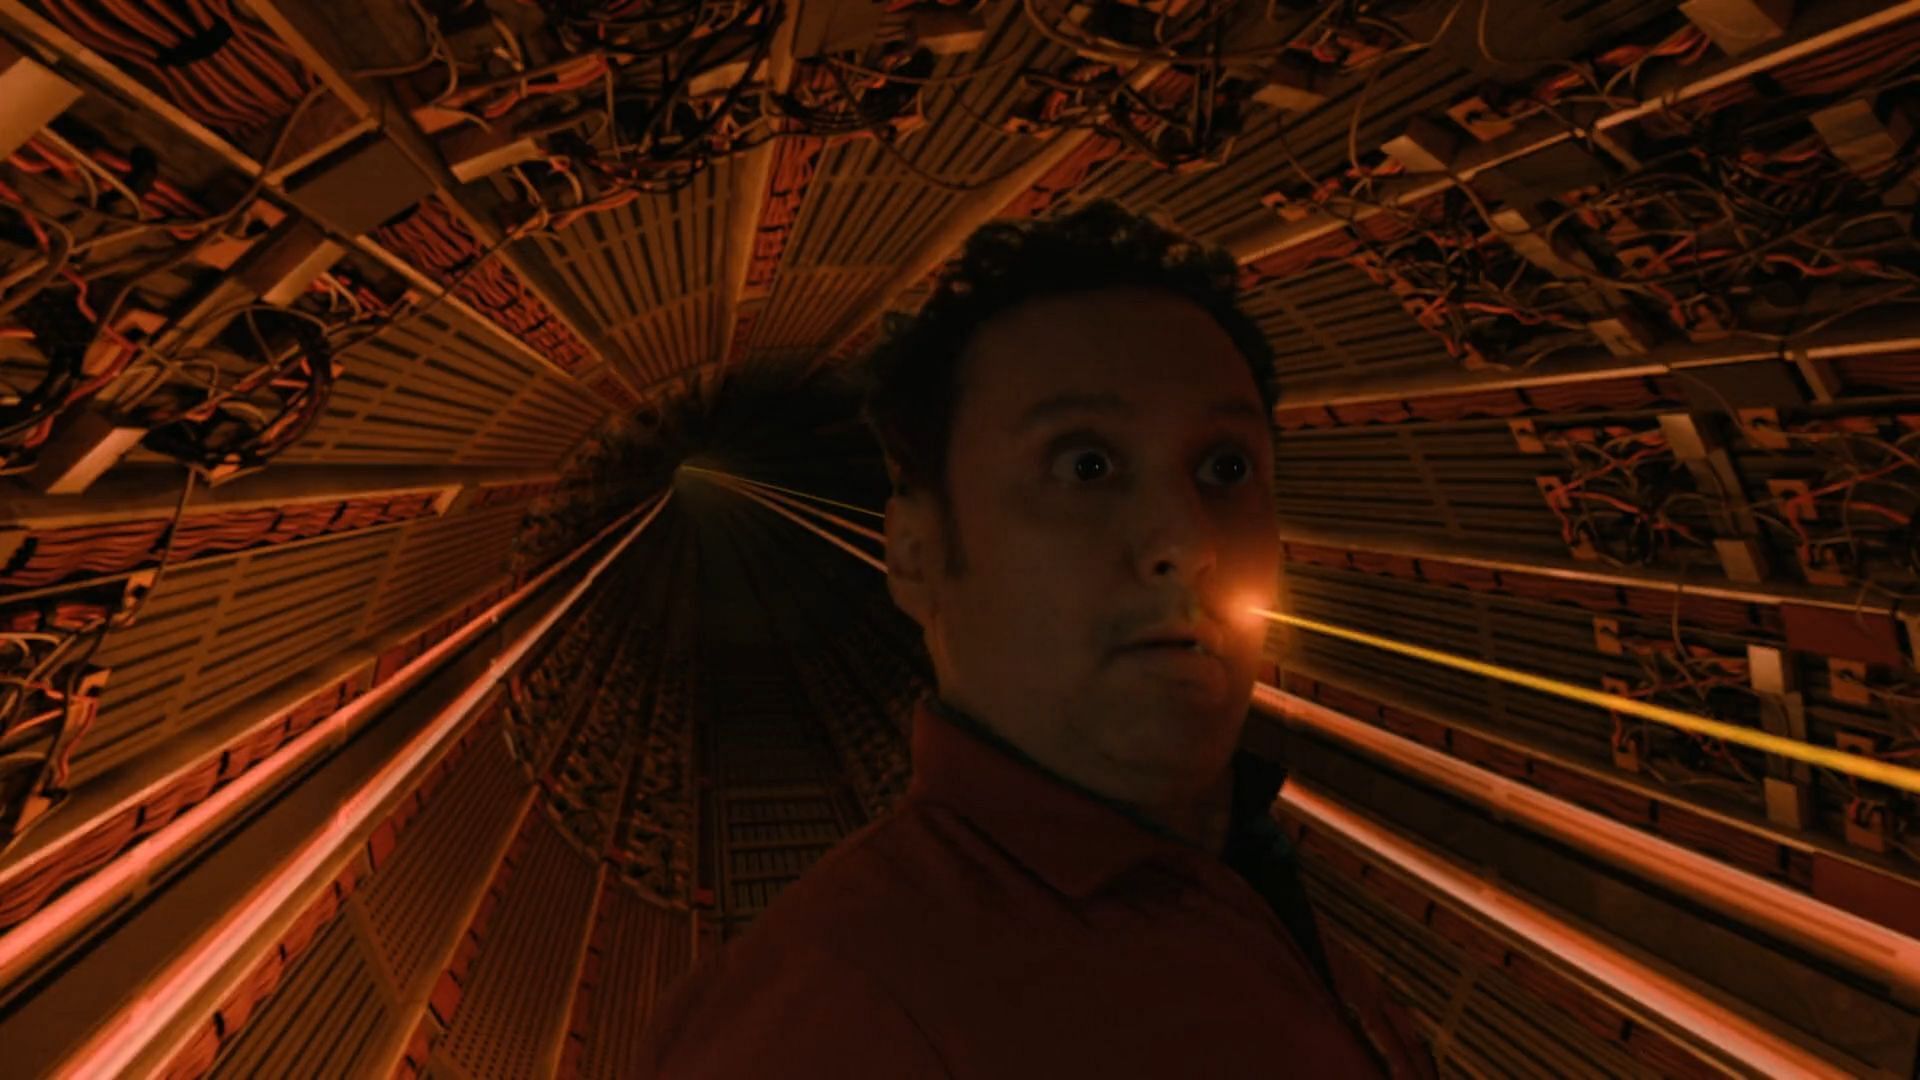 Ben being hit by a beam inside the particle accelerator, as seen in Evil season 4 episode 1 (Image via Paramount+)